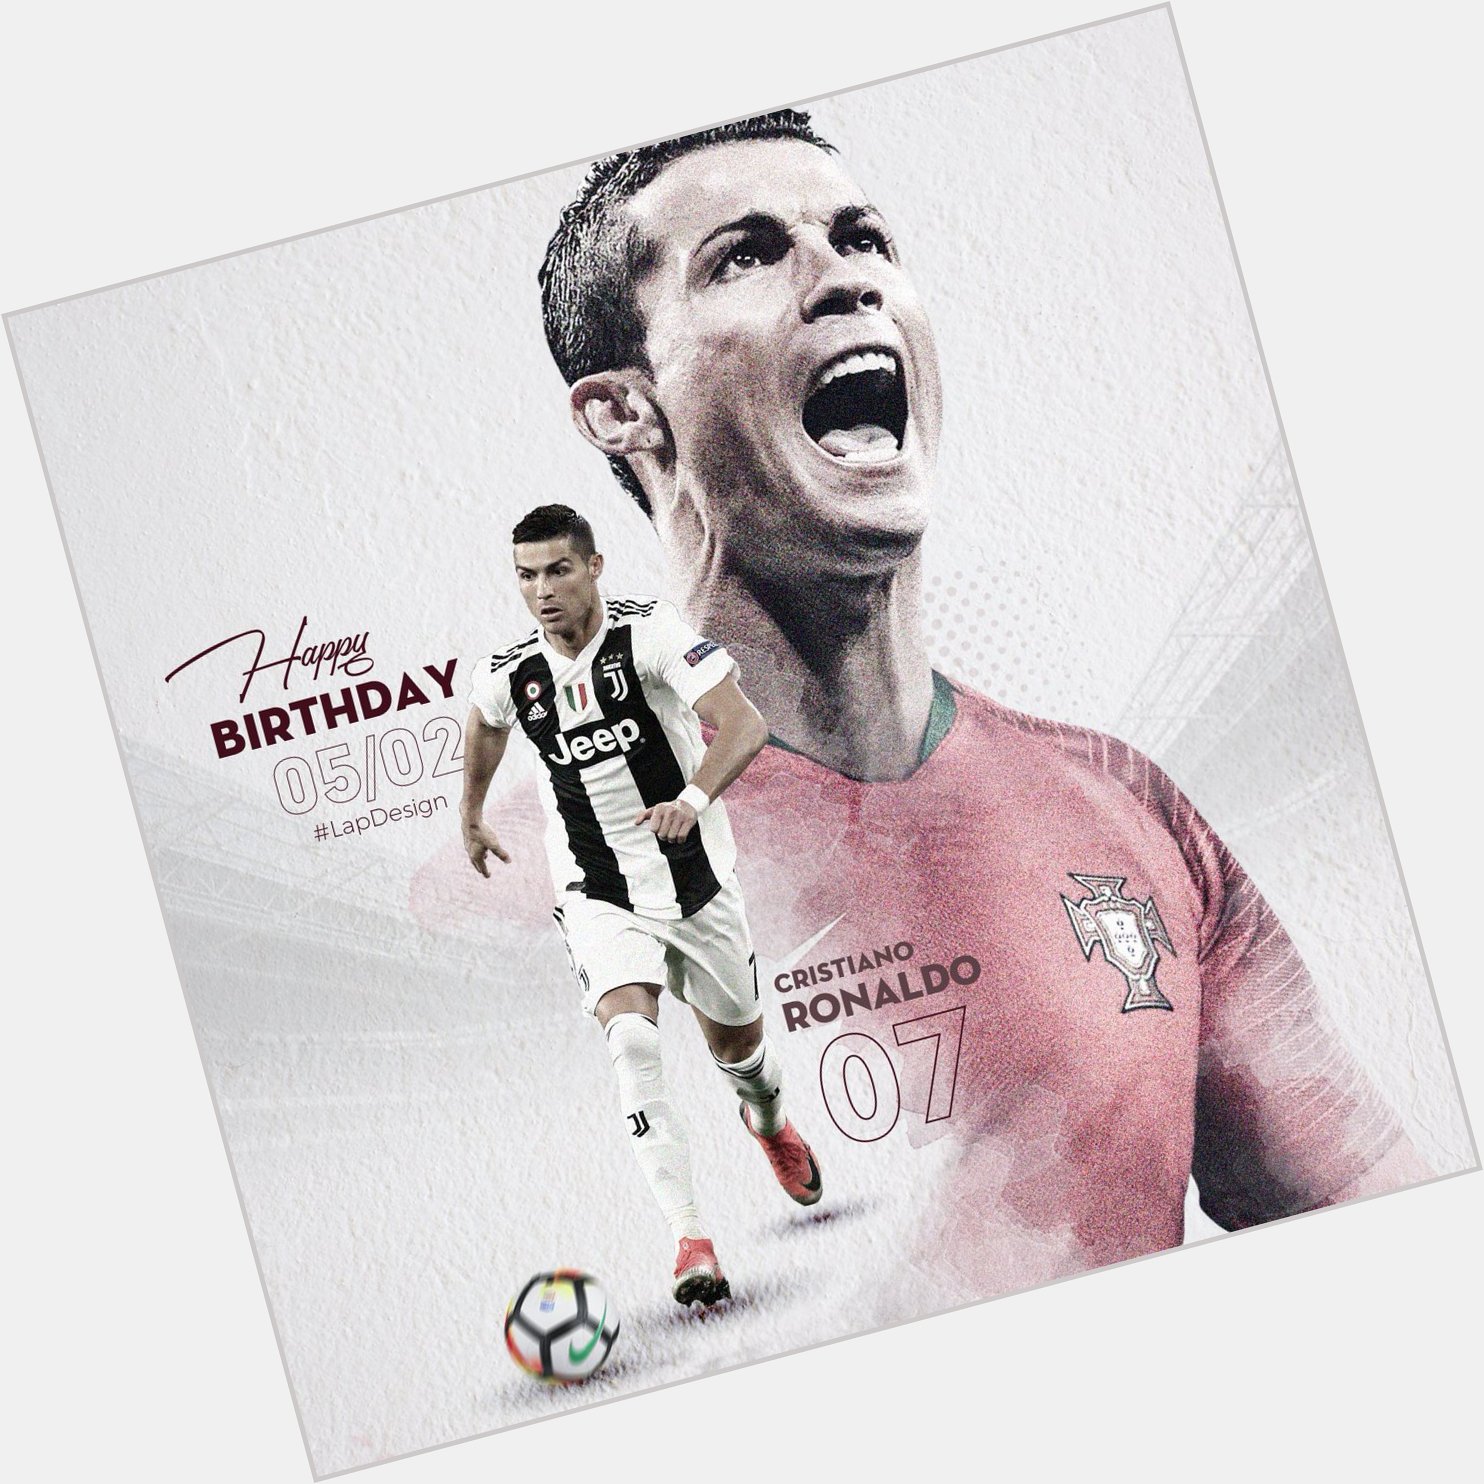 HAPPY BIRTHDAY CRISTIANO RONALDO
NO ONE WILL BE MORE GREAT AS YOU.... 